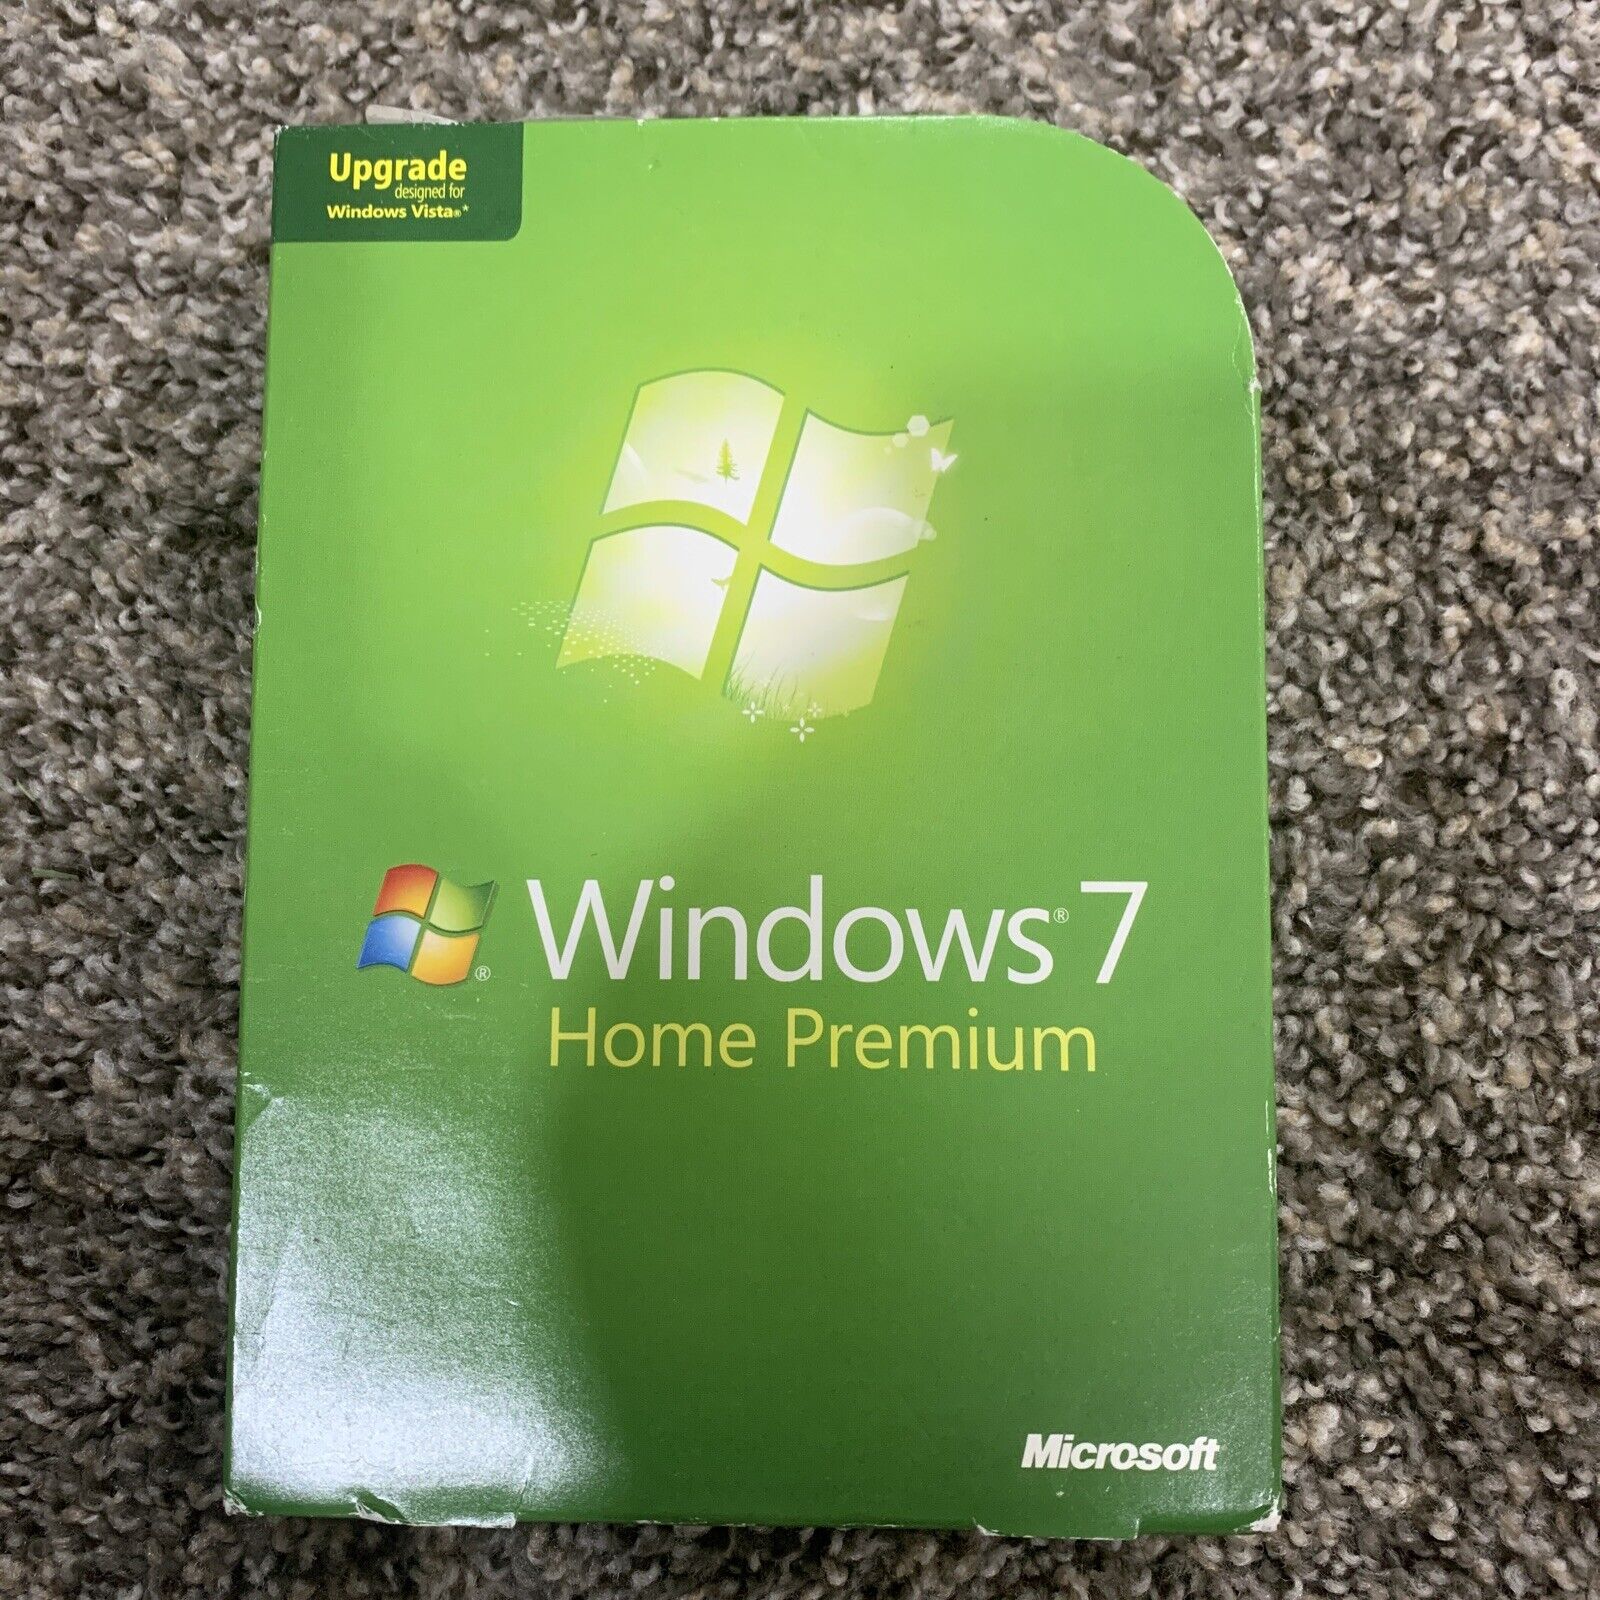 Microsoft Windows 7 Home Premium 2 DVD with Product Key- No Scratches